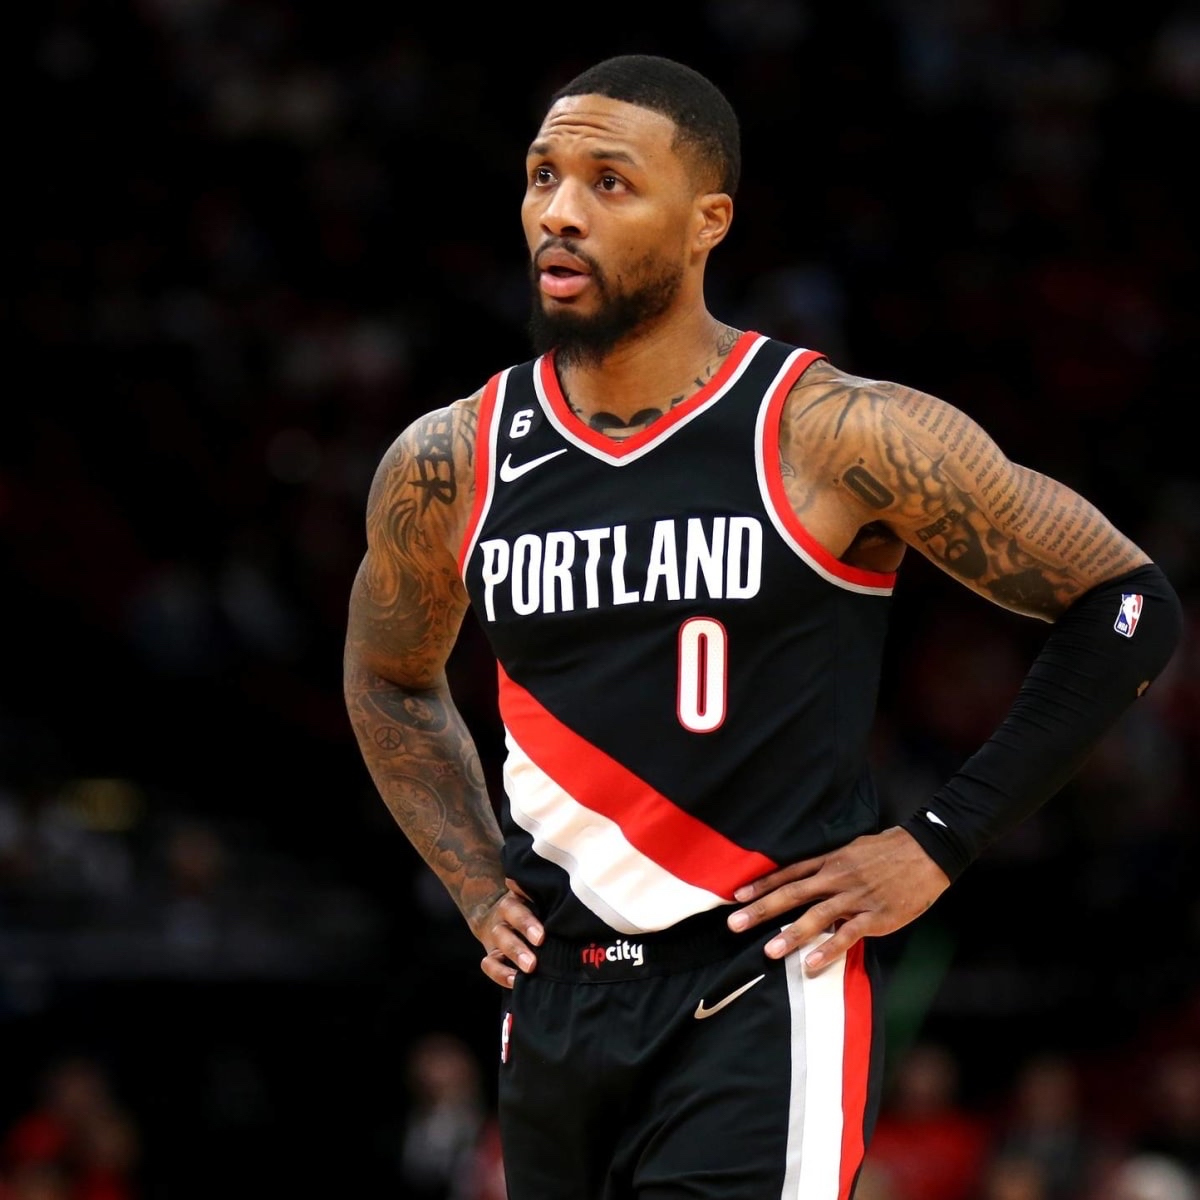 Damian Lillard the star of the point guard has been traded to the Milwaukee Bucks.